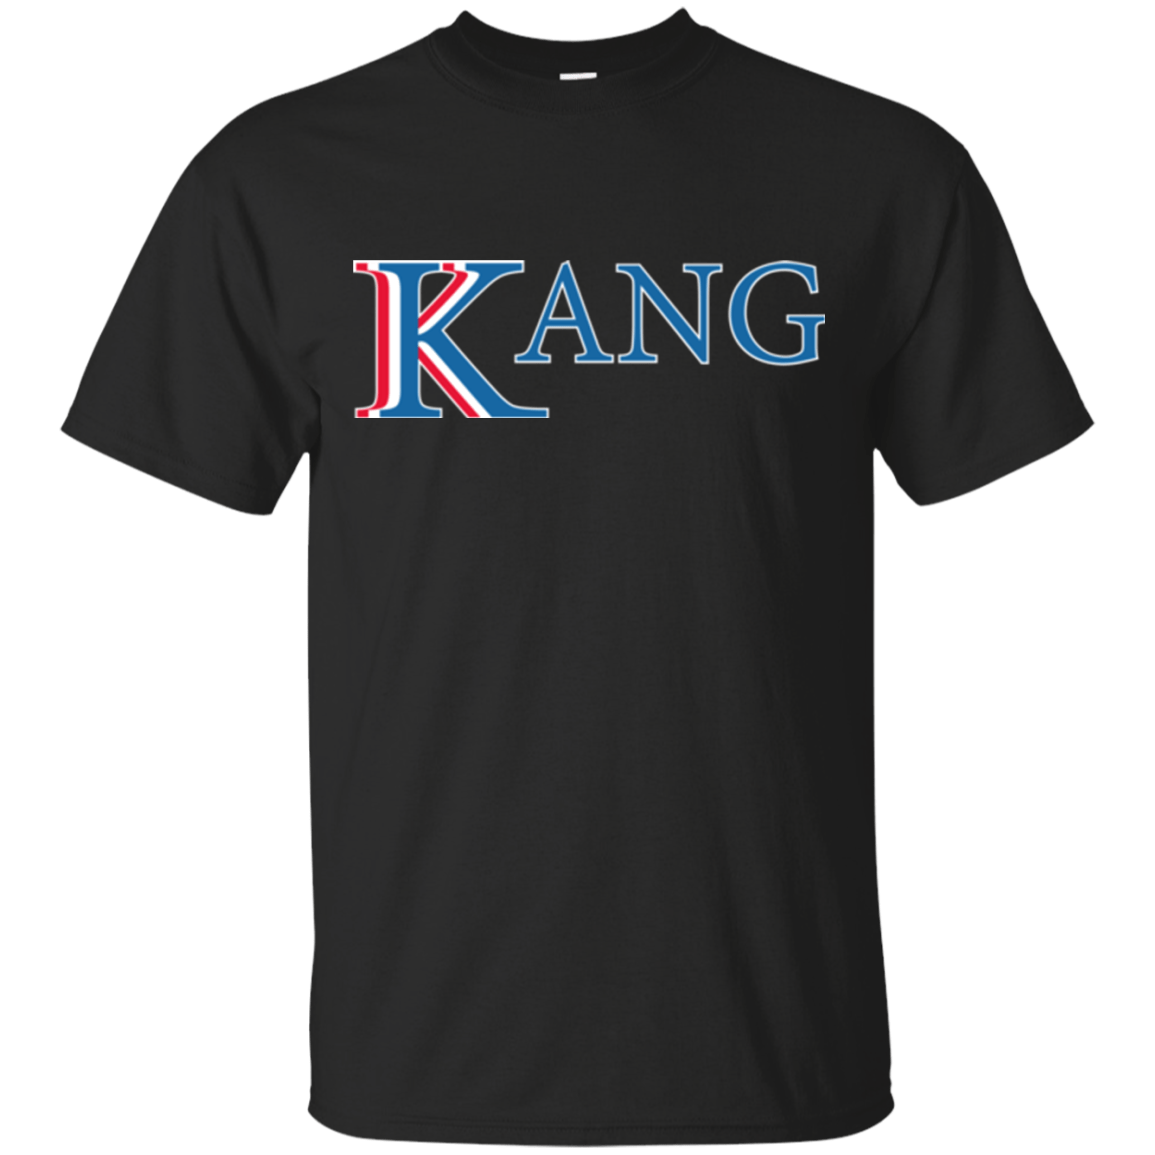 T-Shirts Black / Small Vote for Kang T-Shirt